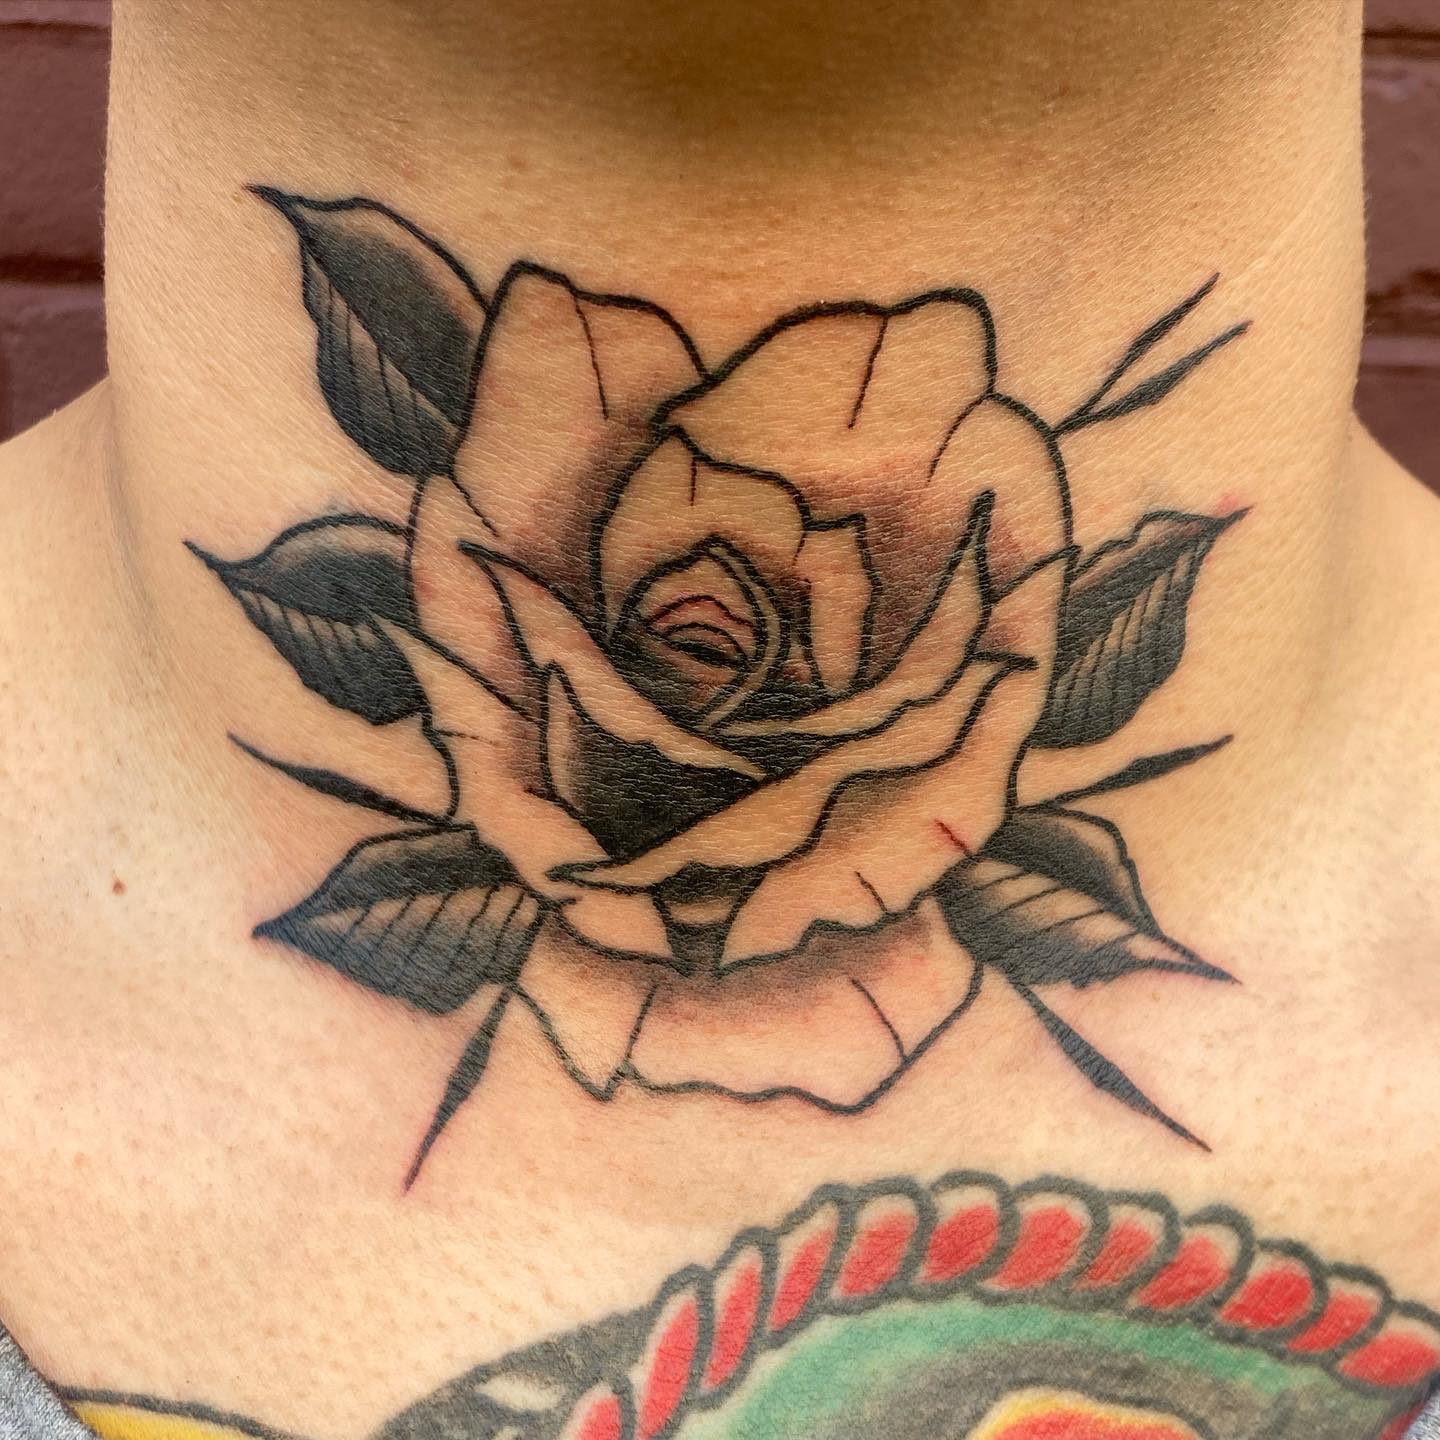 Rose tattoos are one of the most demanded tattoos and it's not strange to hear that because they symbolize love and passion. Also, they look great on every part of body. Without doubt, this tattoo will be a great companion on your throat too.